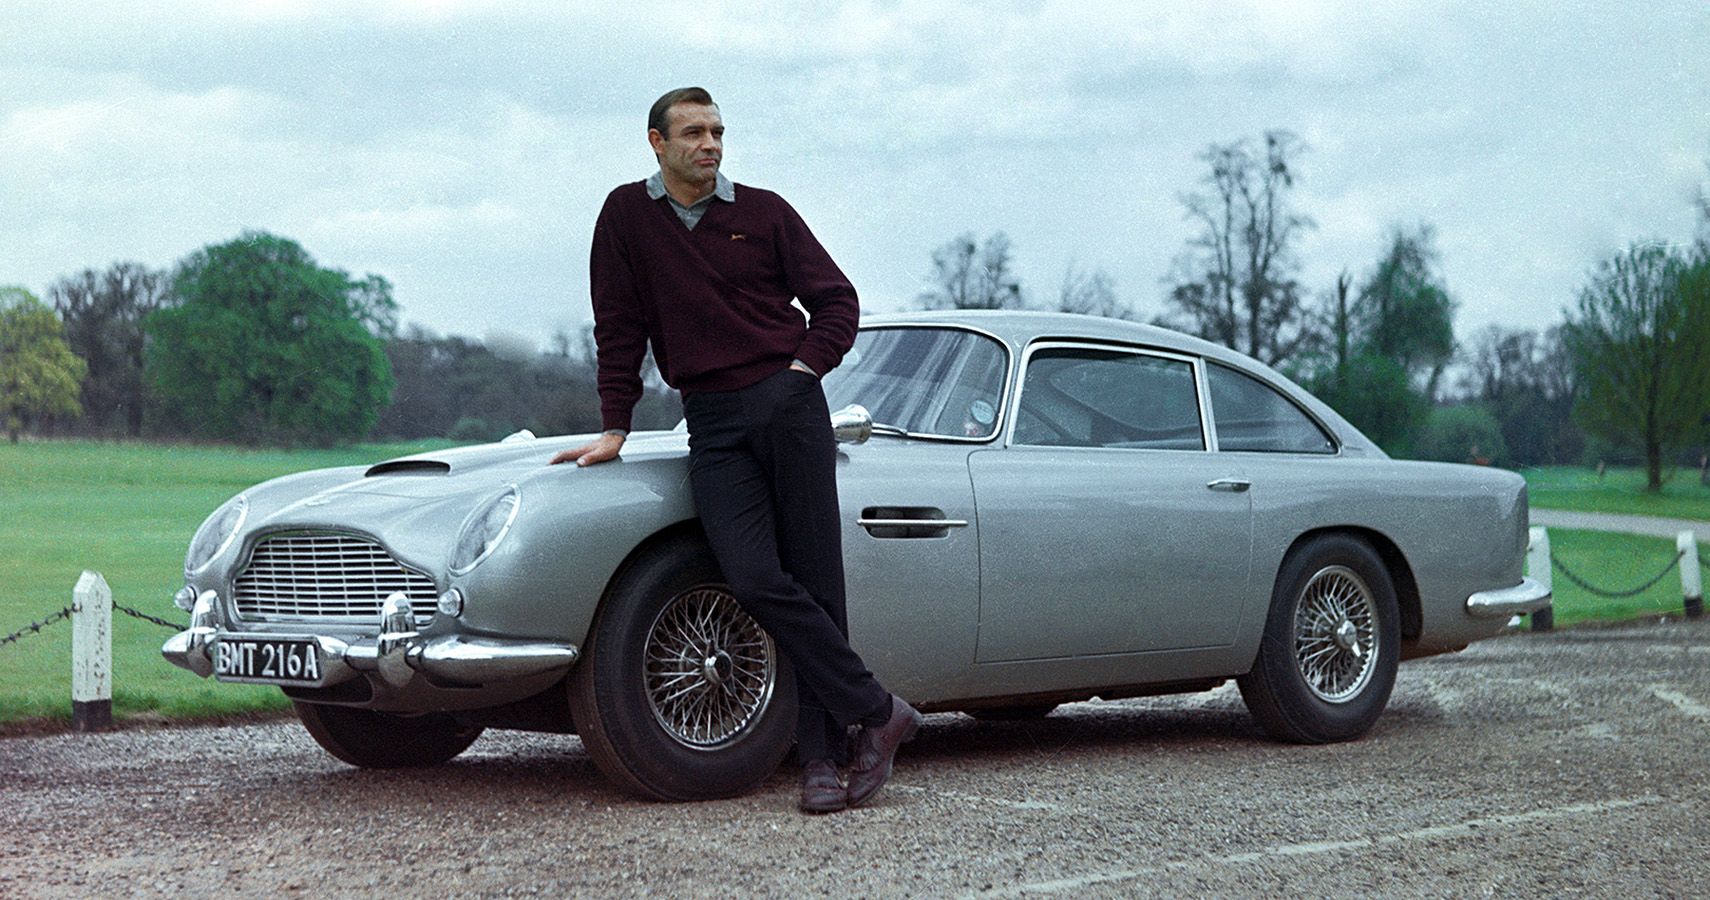 Sean Connery In The Movie GOLDFINGER, With Aston Martin DB5